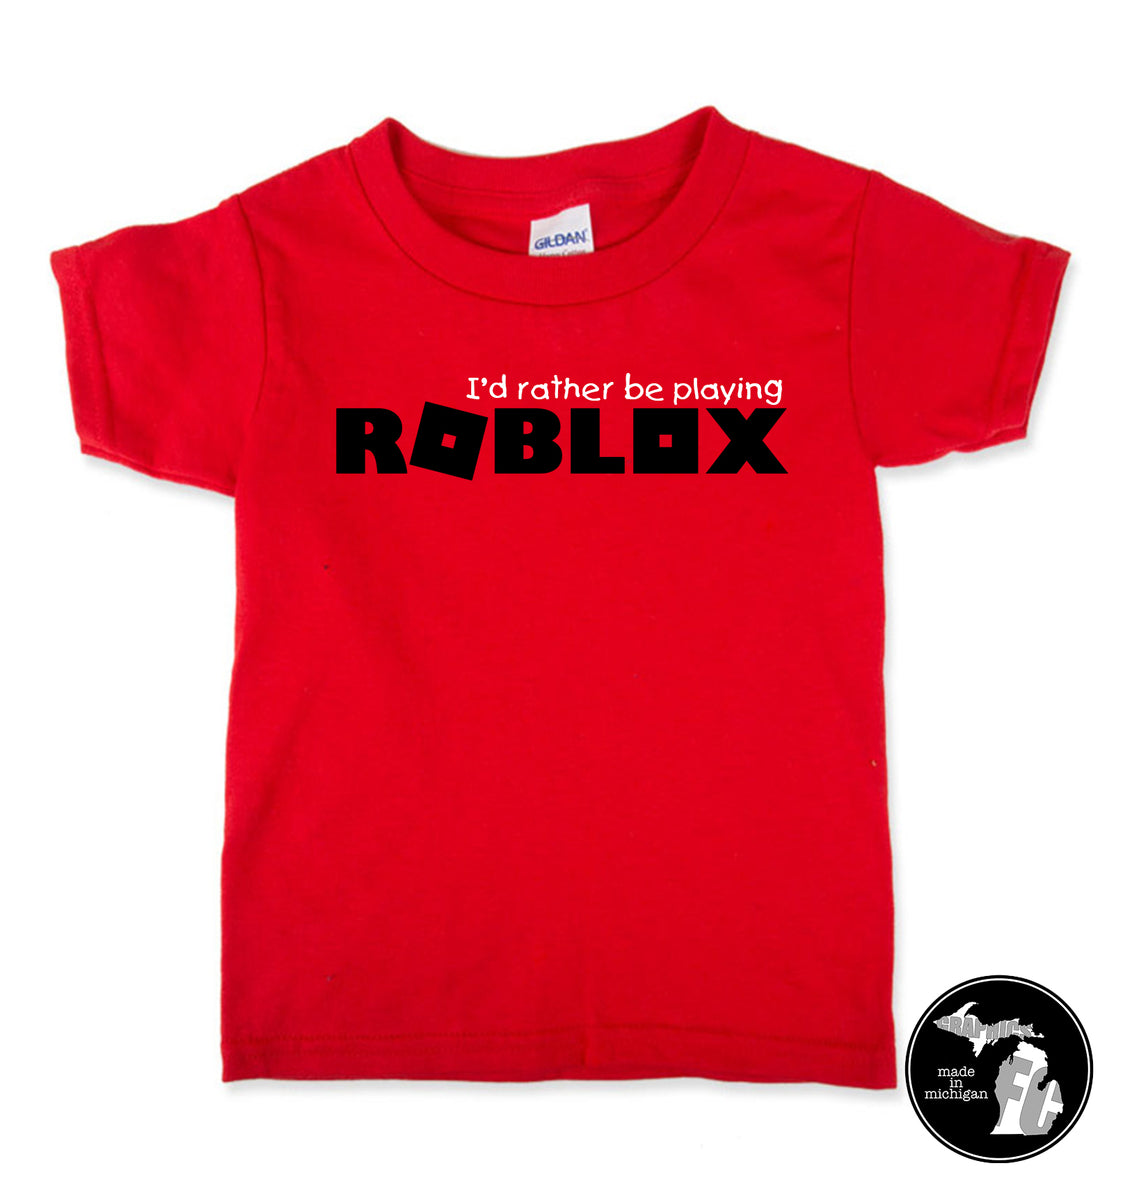 Most Expensive Roblox Shirt Template Rblx Gg Sigh Up - how to get roblox shirts for free 2019 nils stucki kieferorthopade